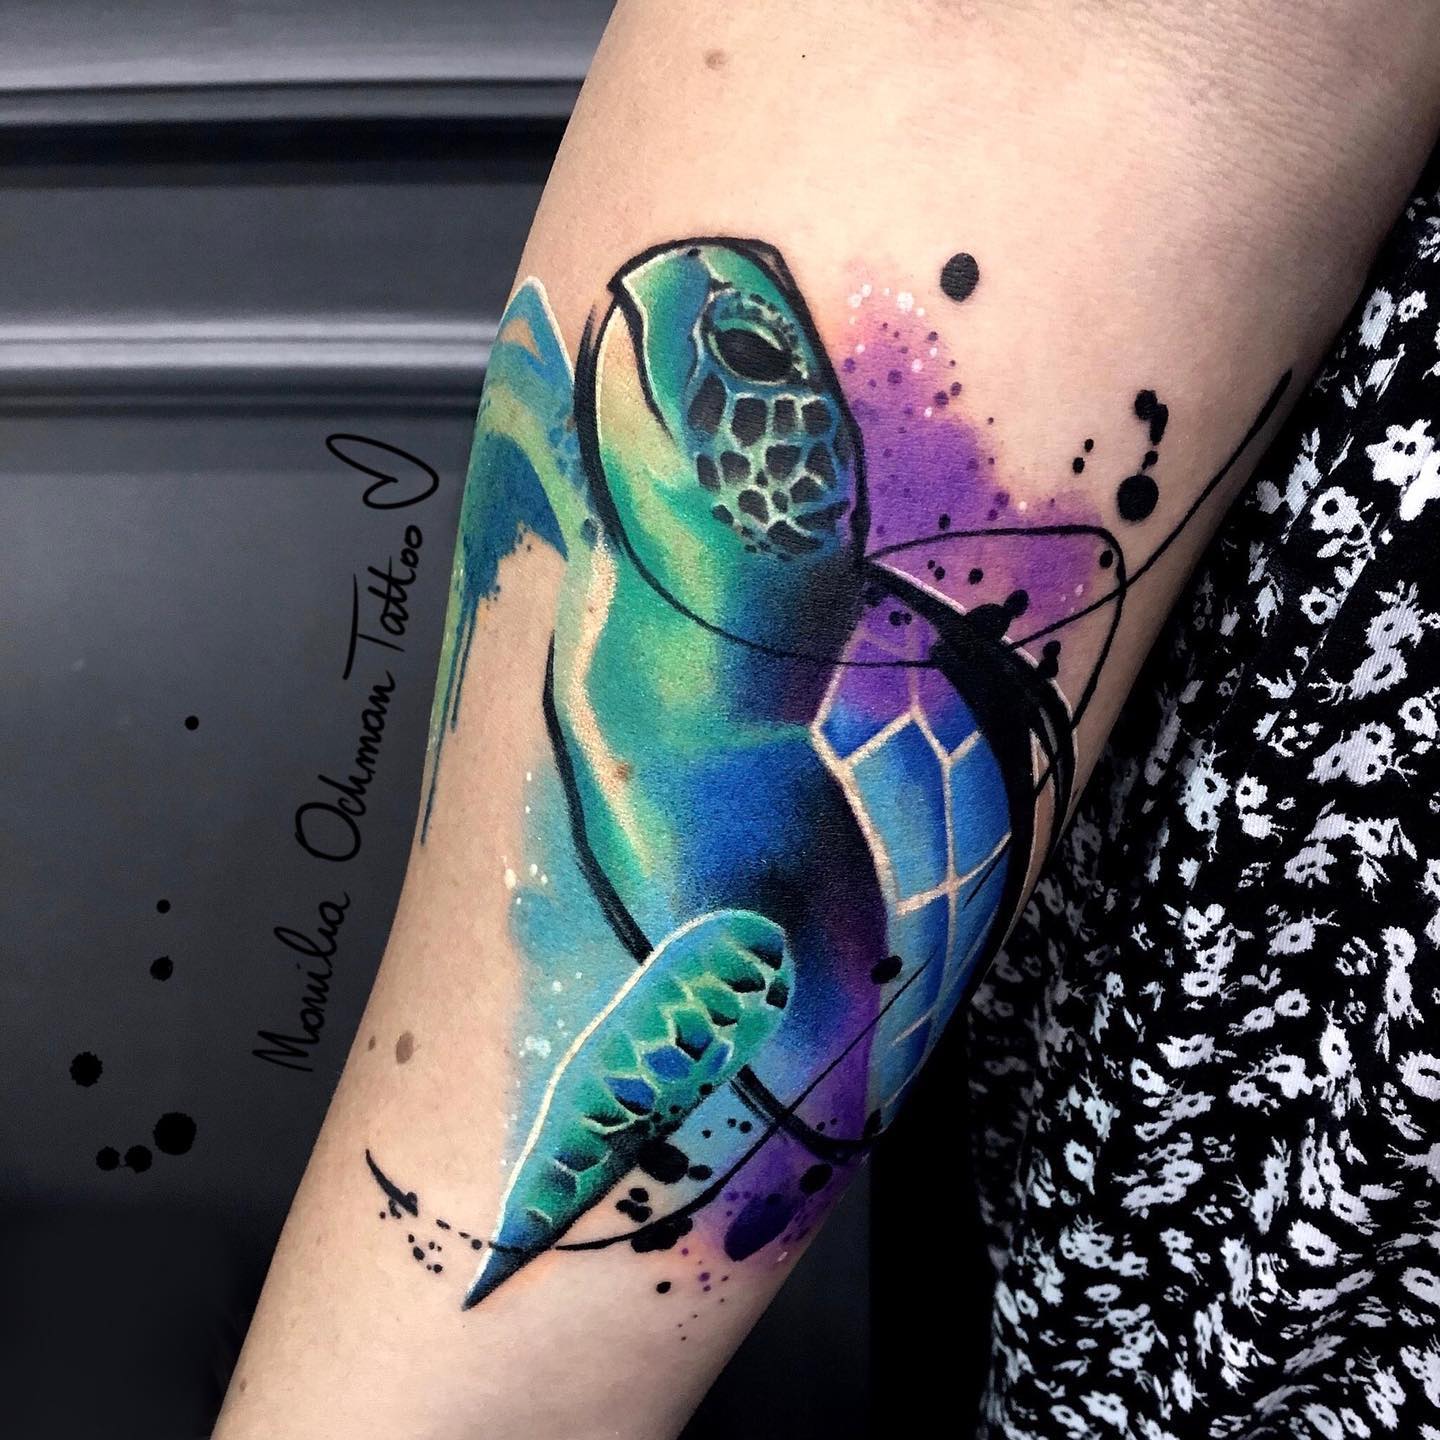 Green, blue and purple colors create a great combination! It's like a rainbow exploded all over the sea turtle tattoo! Your arm will definitely shine out with it.